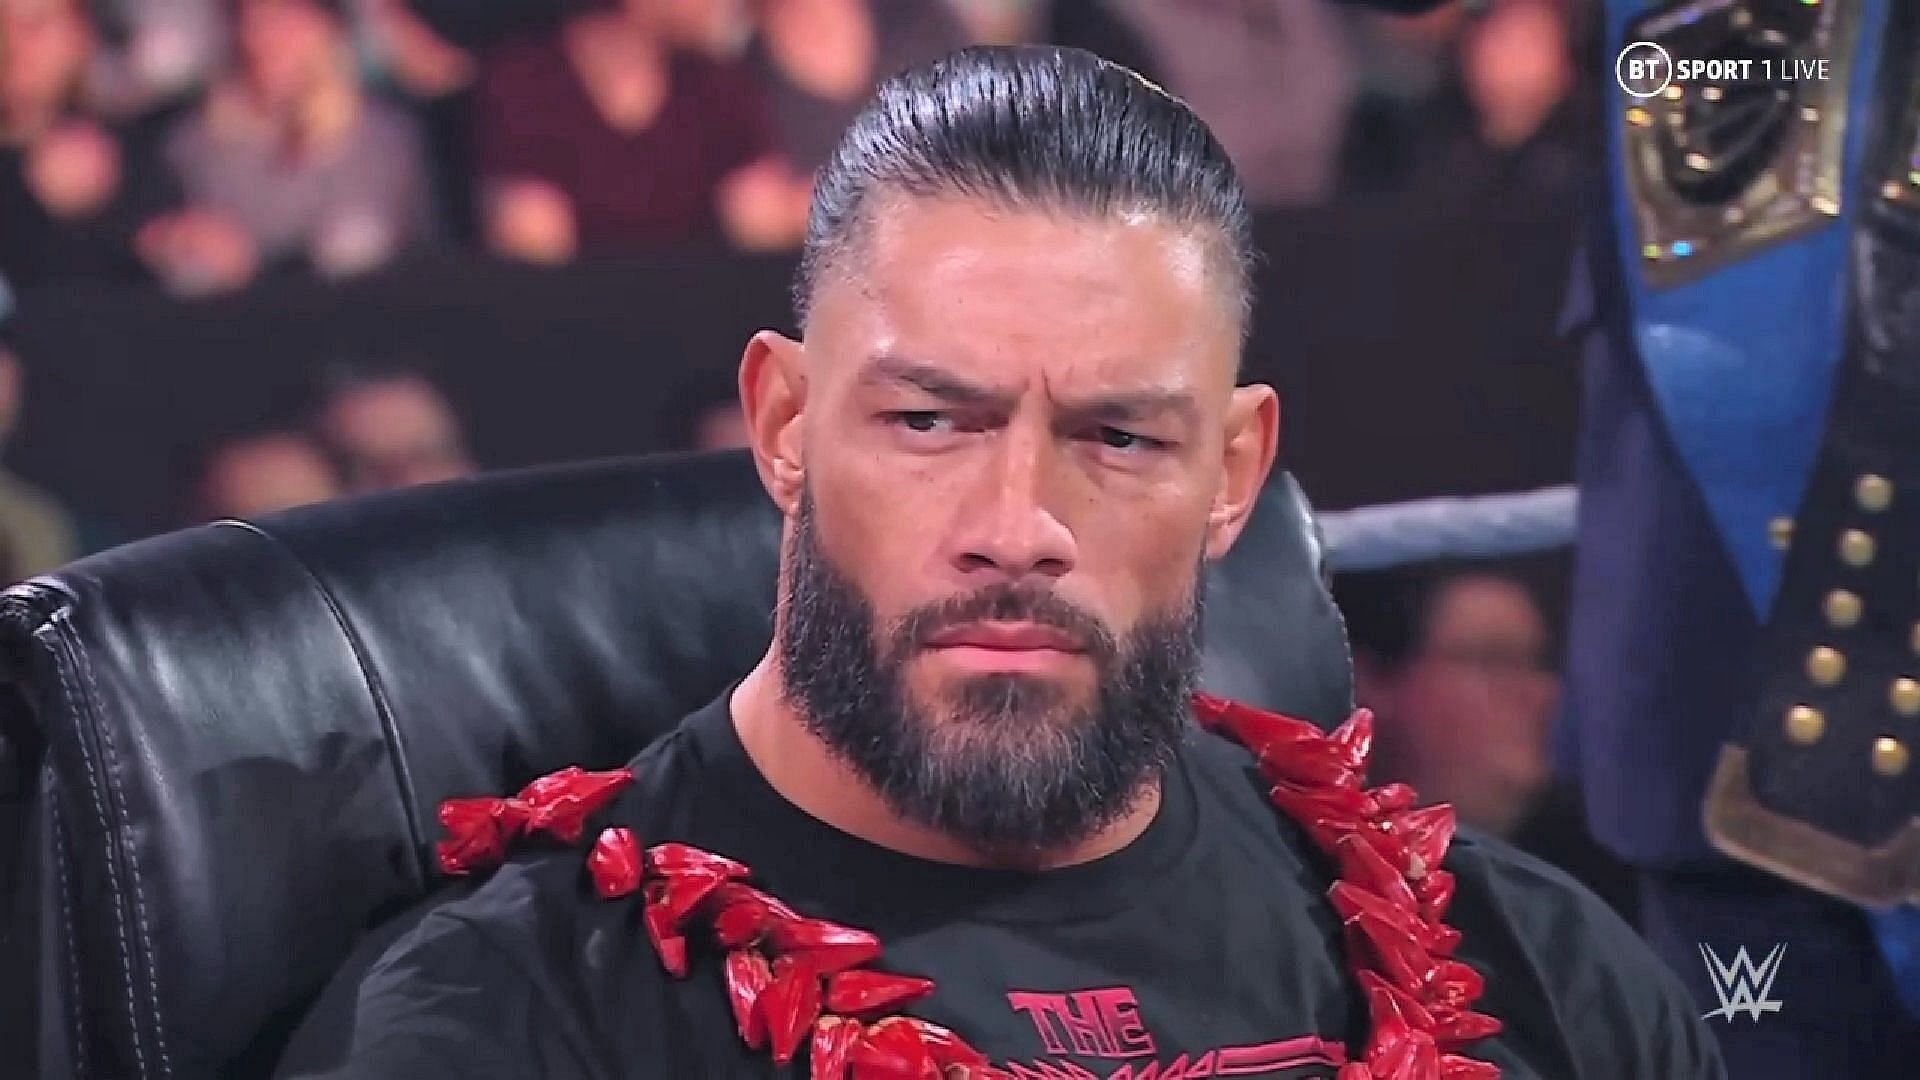 WWE star wants to challenge another champion after failing to dethrone Roman Reigns